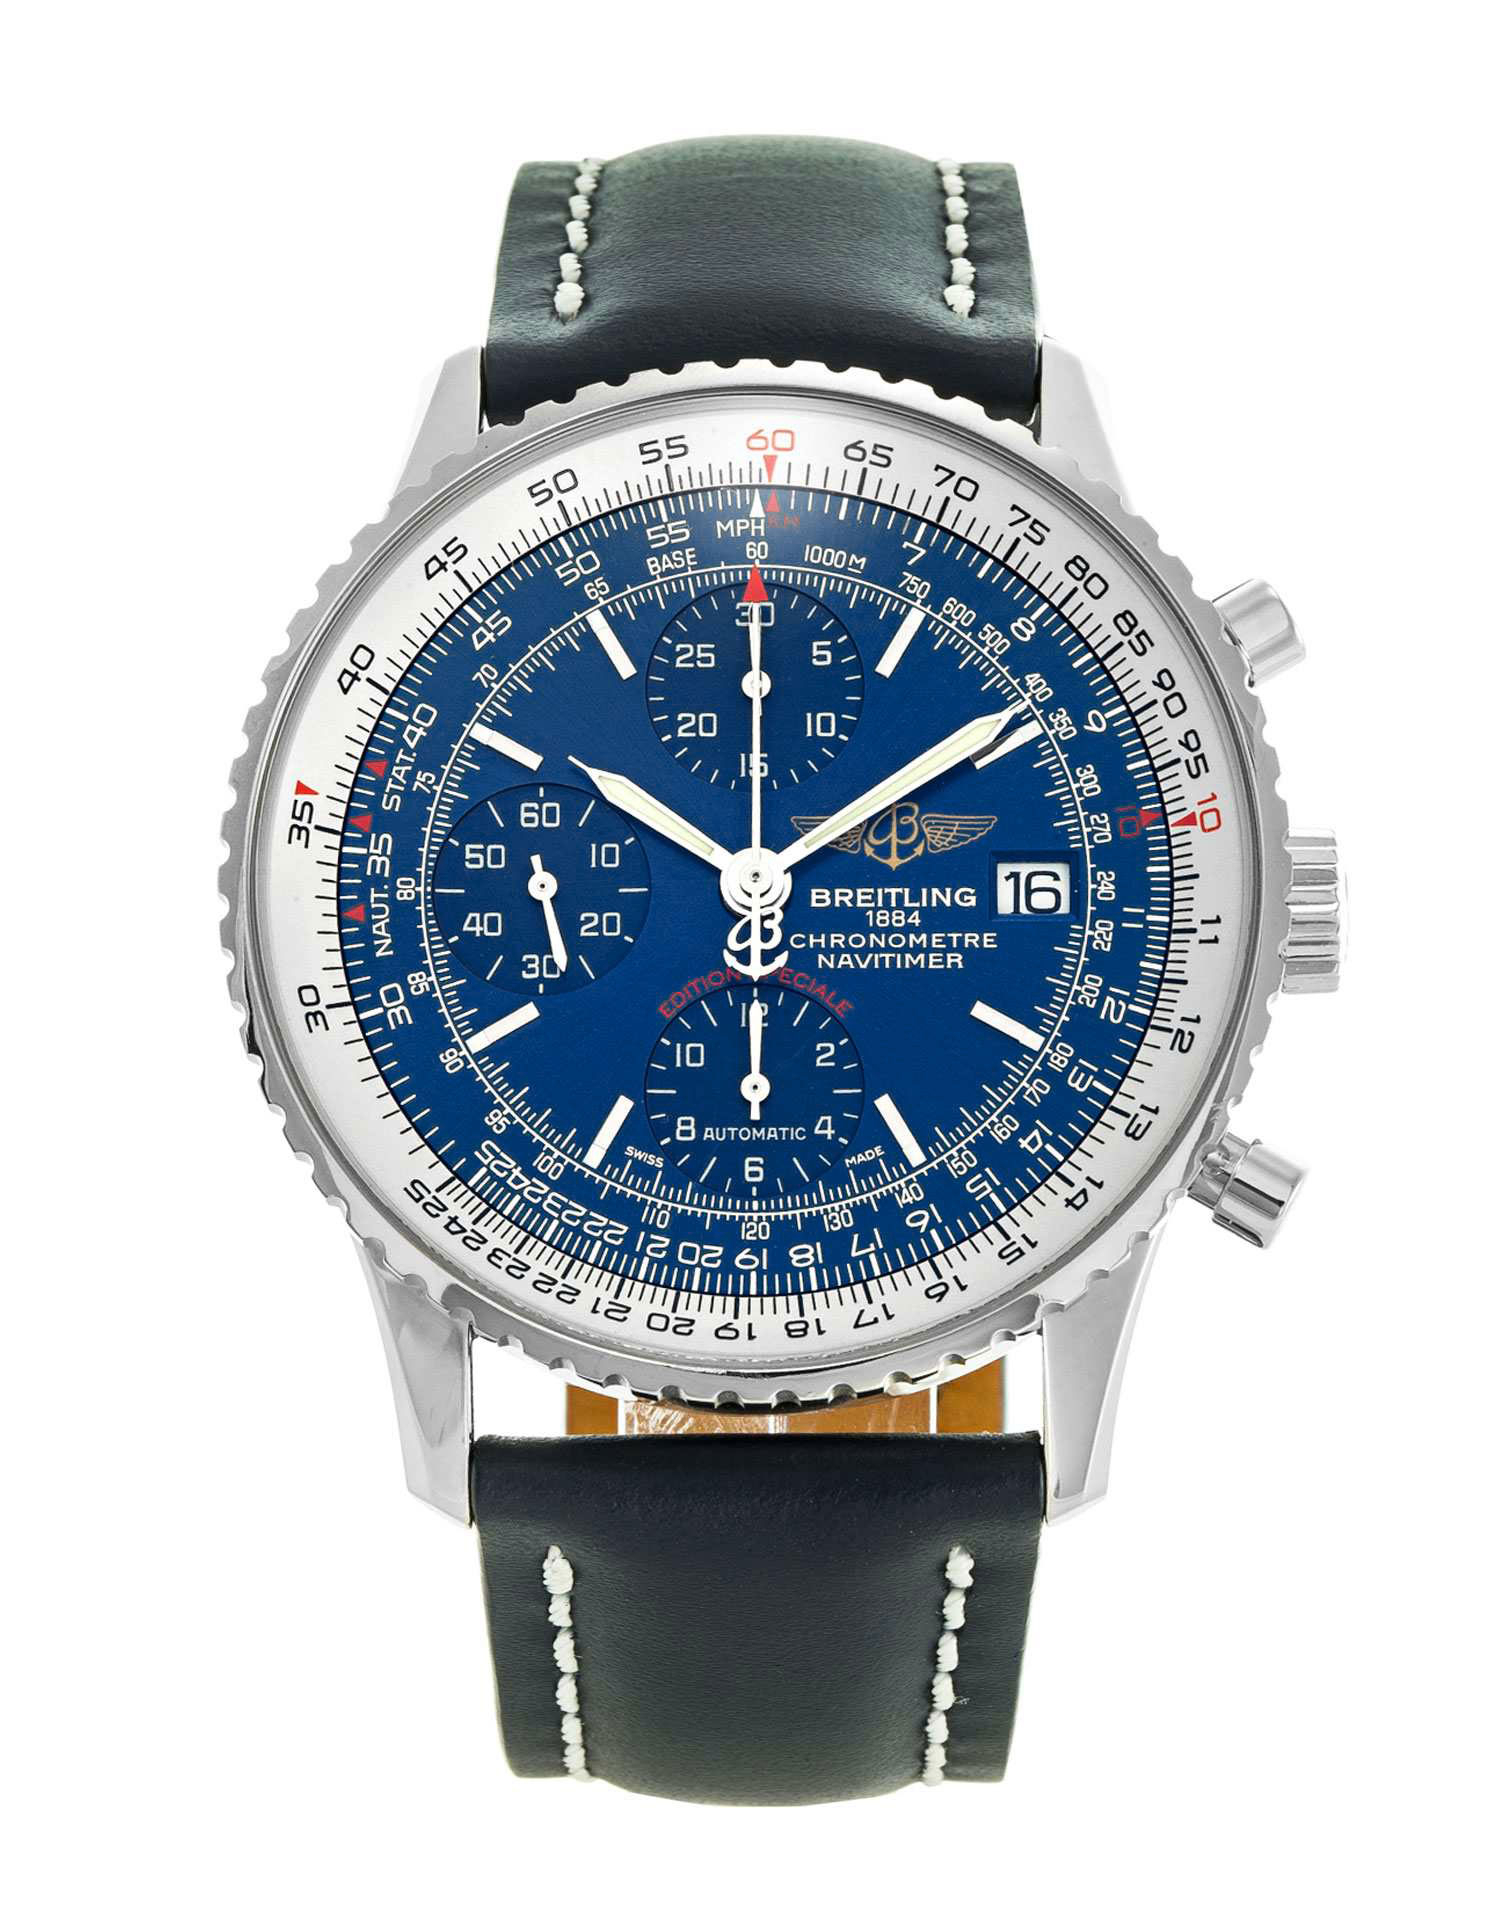 Breitling Navitimer Heritage A13324 Watch | Watchfinder &amp; Co. tout Breitling Navitimer Heritage